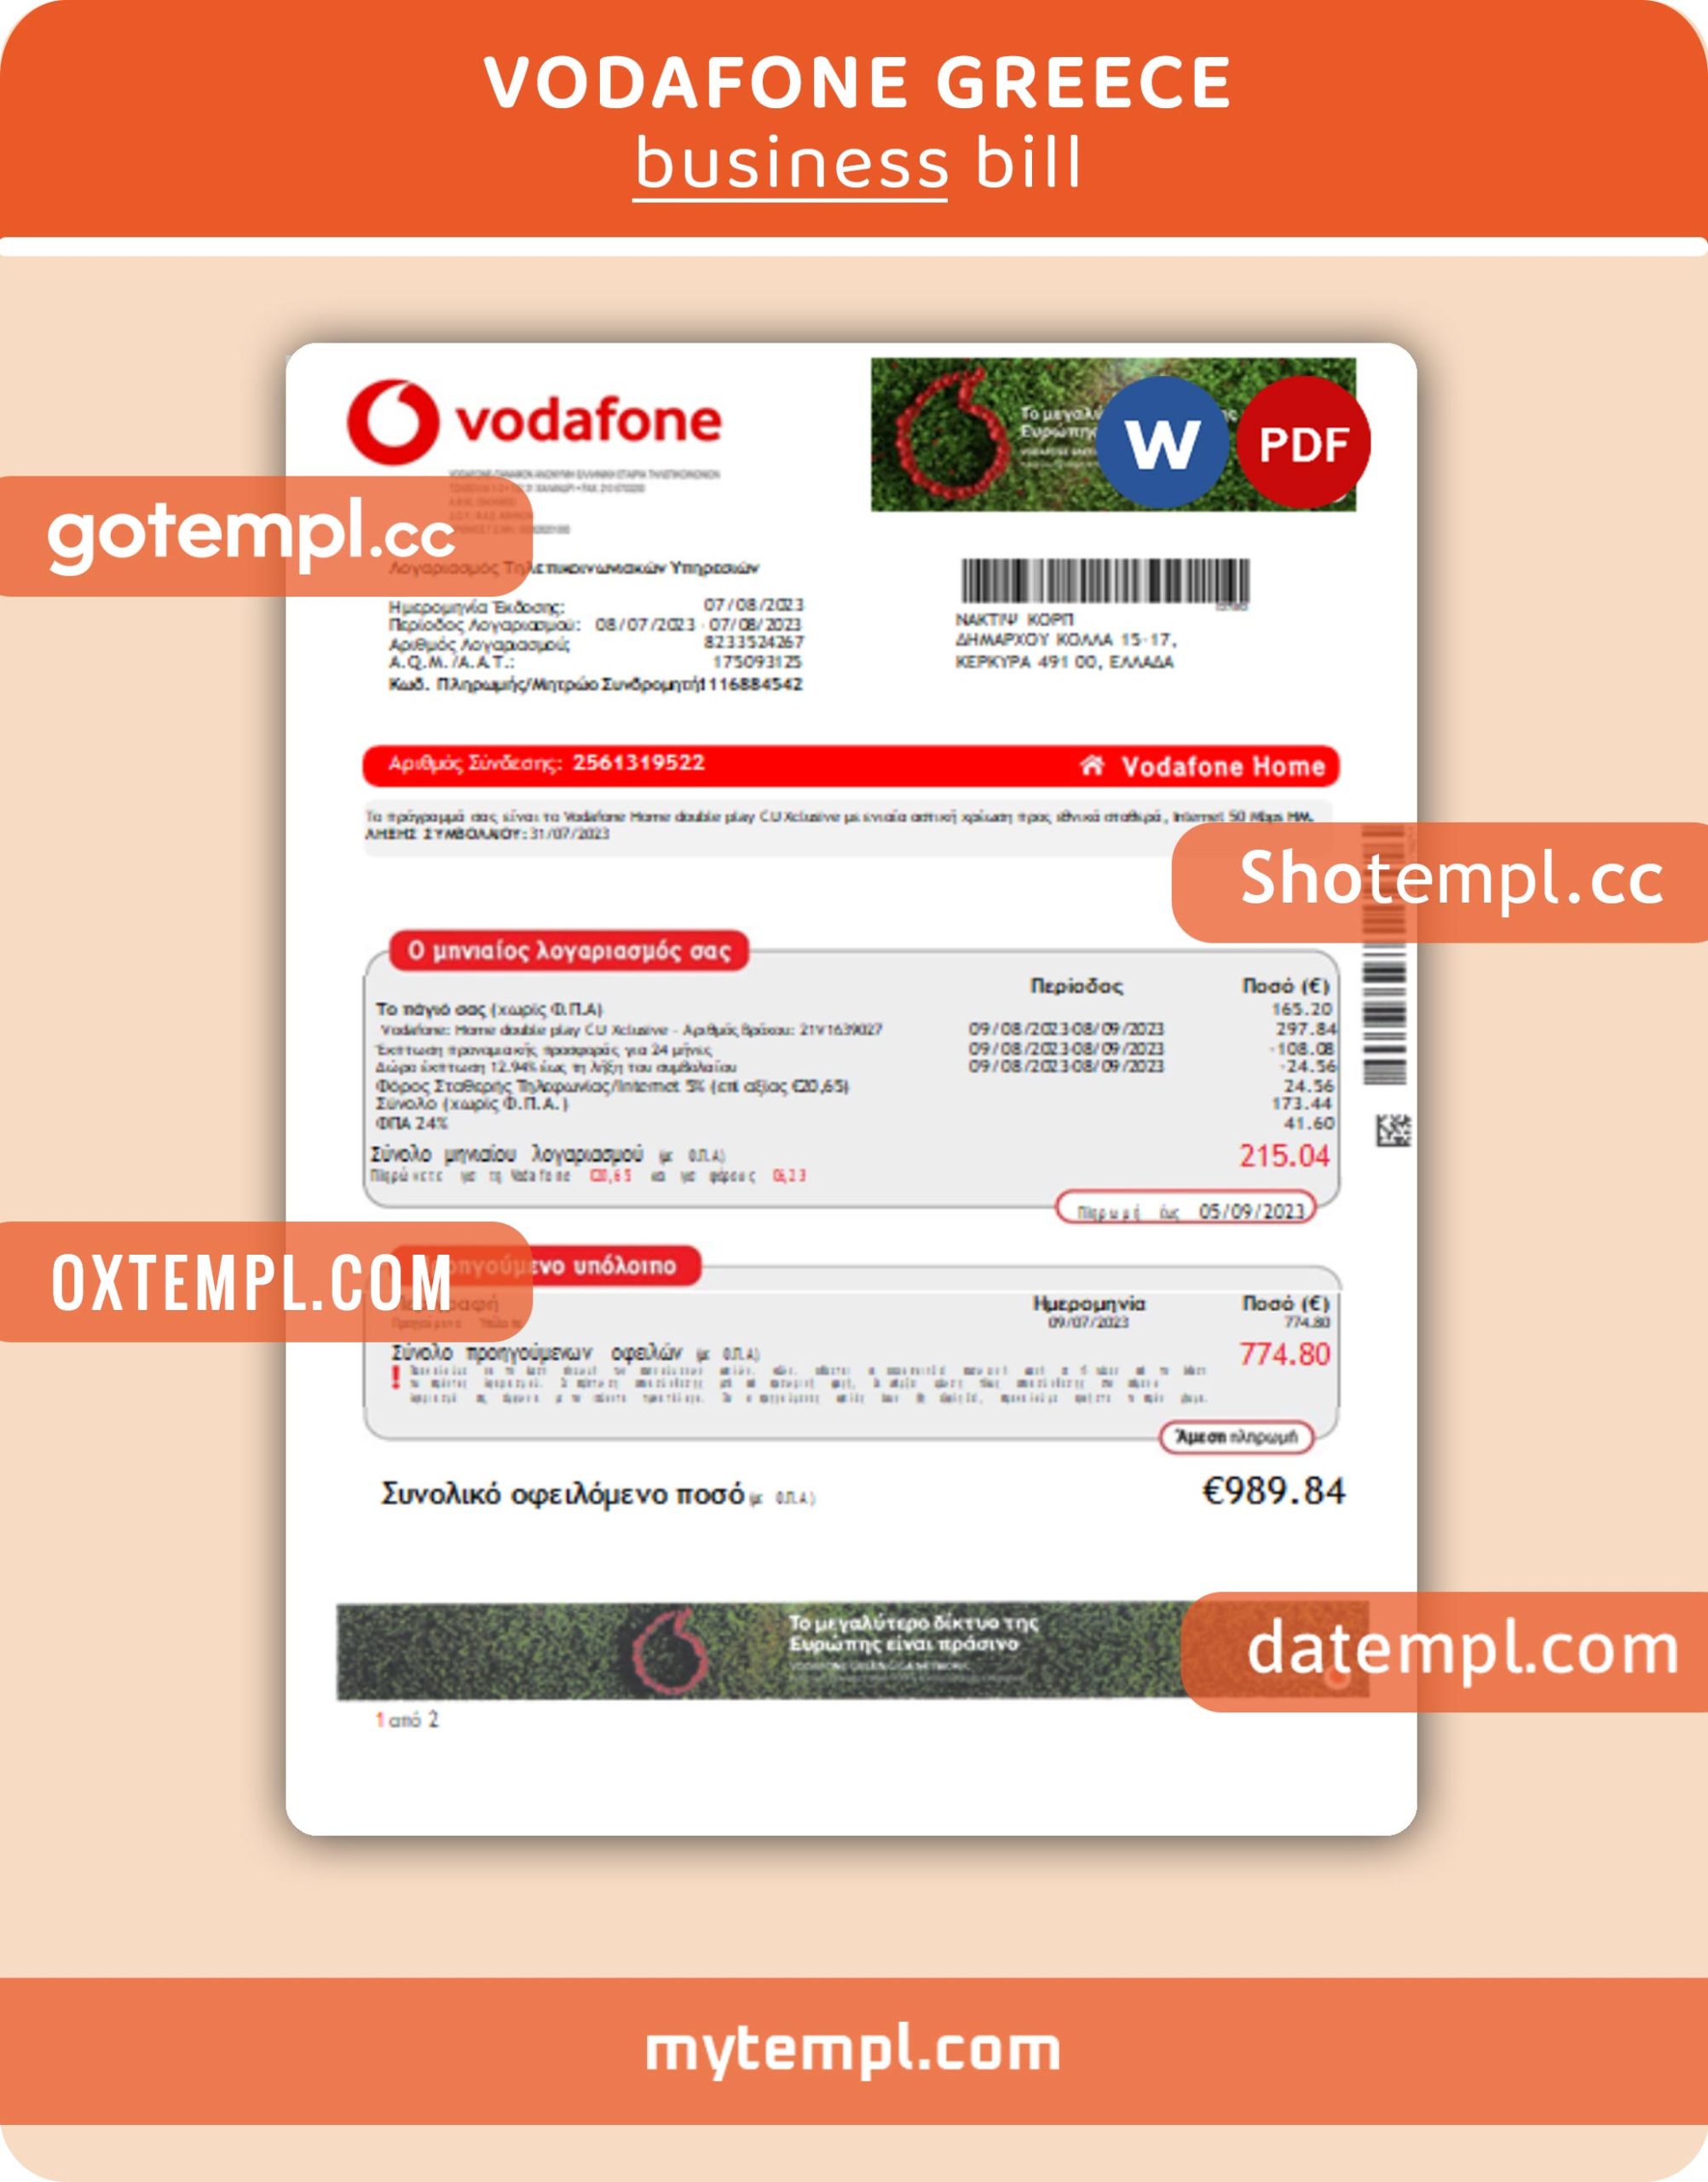 Vodafone Greece utility business bill, Word and PDF template, 2 pages